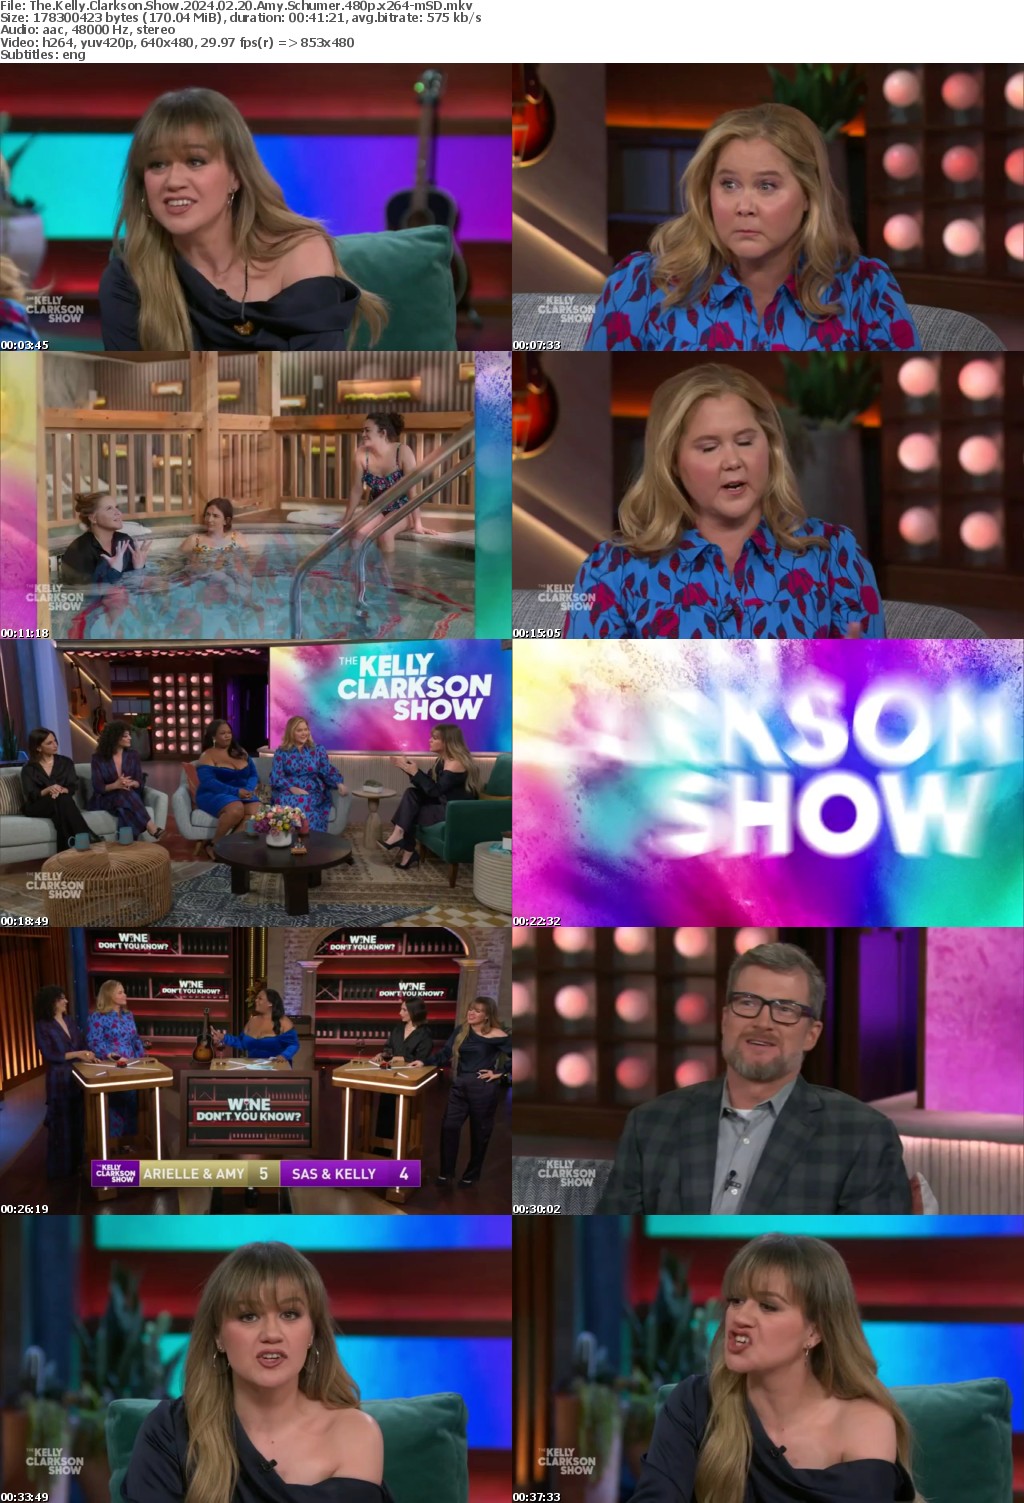 The Kelly Clarkson Show 2024 02 20 Amy Schumer 480p x264-mSD